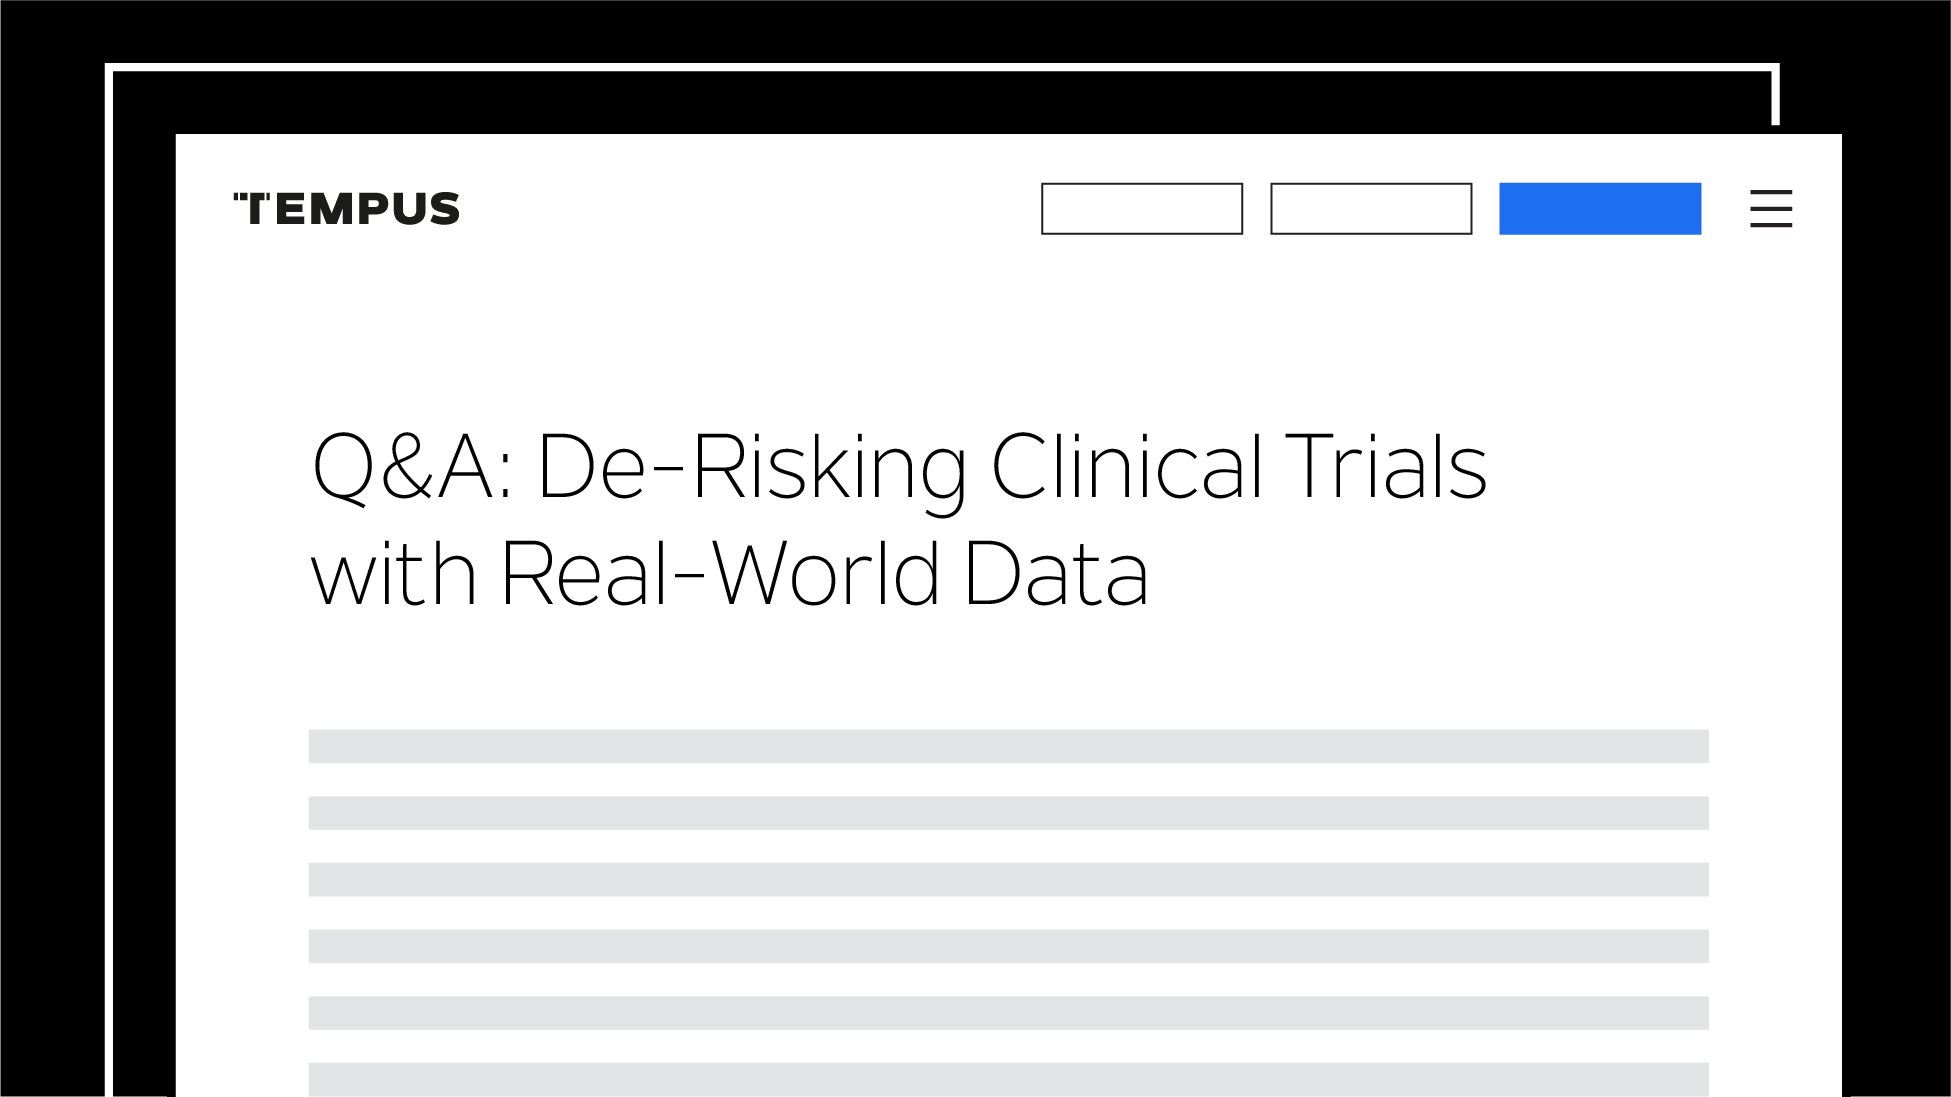 Q&A: De-Risking Clinical Trials with Real-World Data